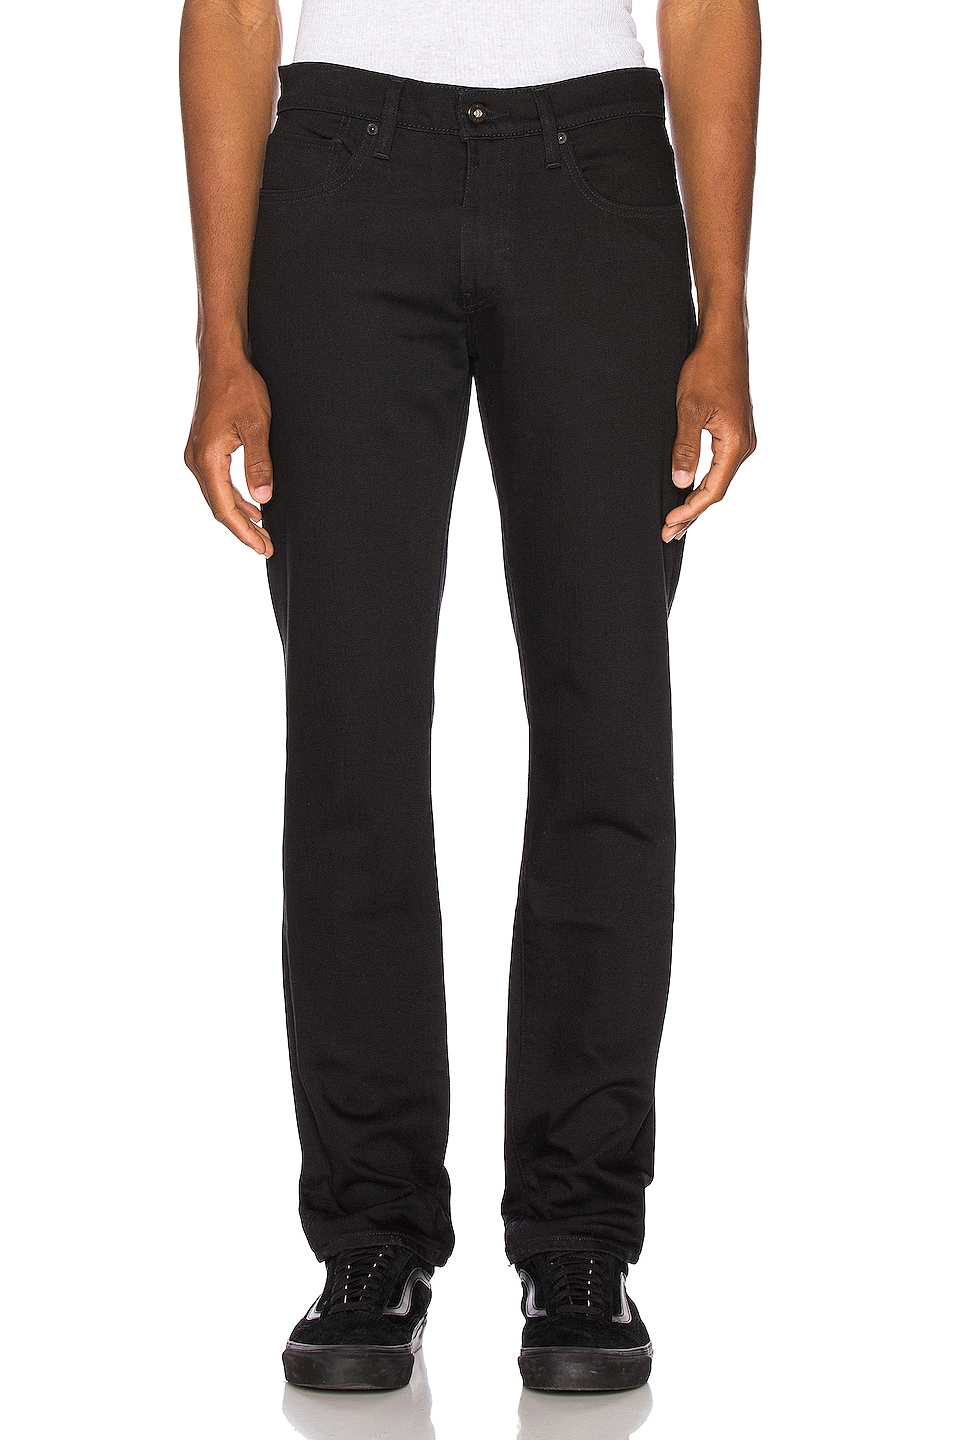 Image 1 of LEVI'S: Made & Crafted 511 Slim Jean in Black Rinse